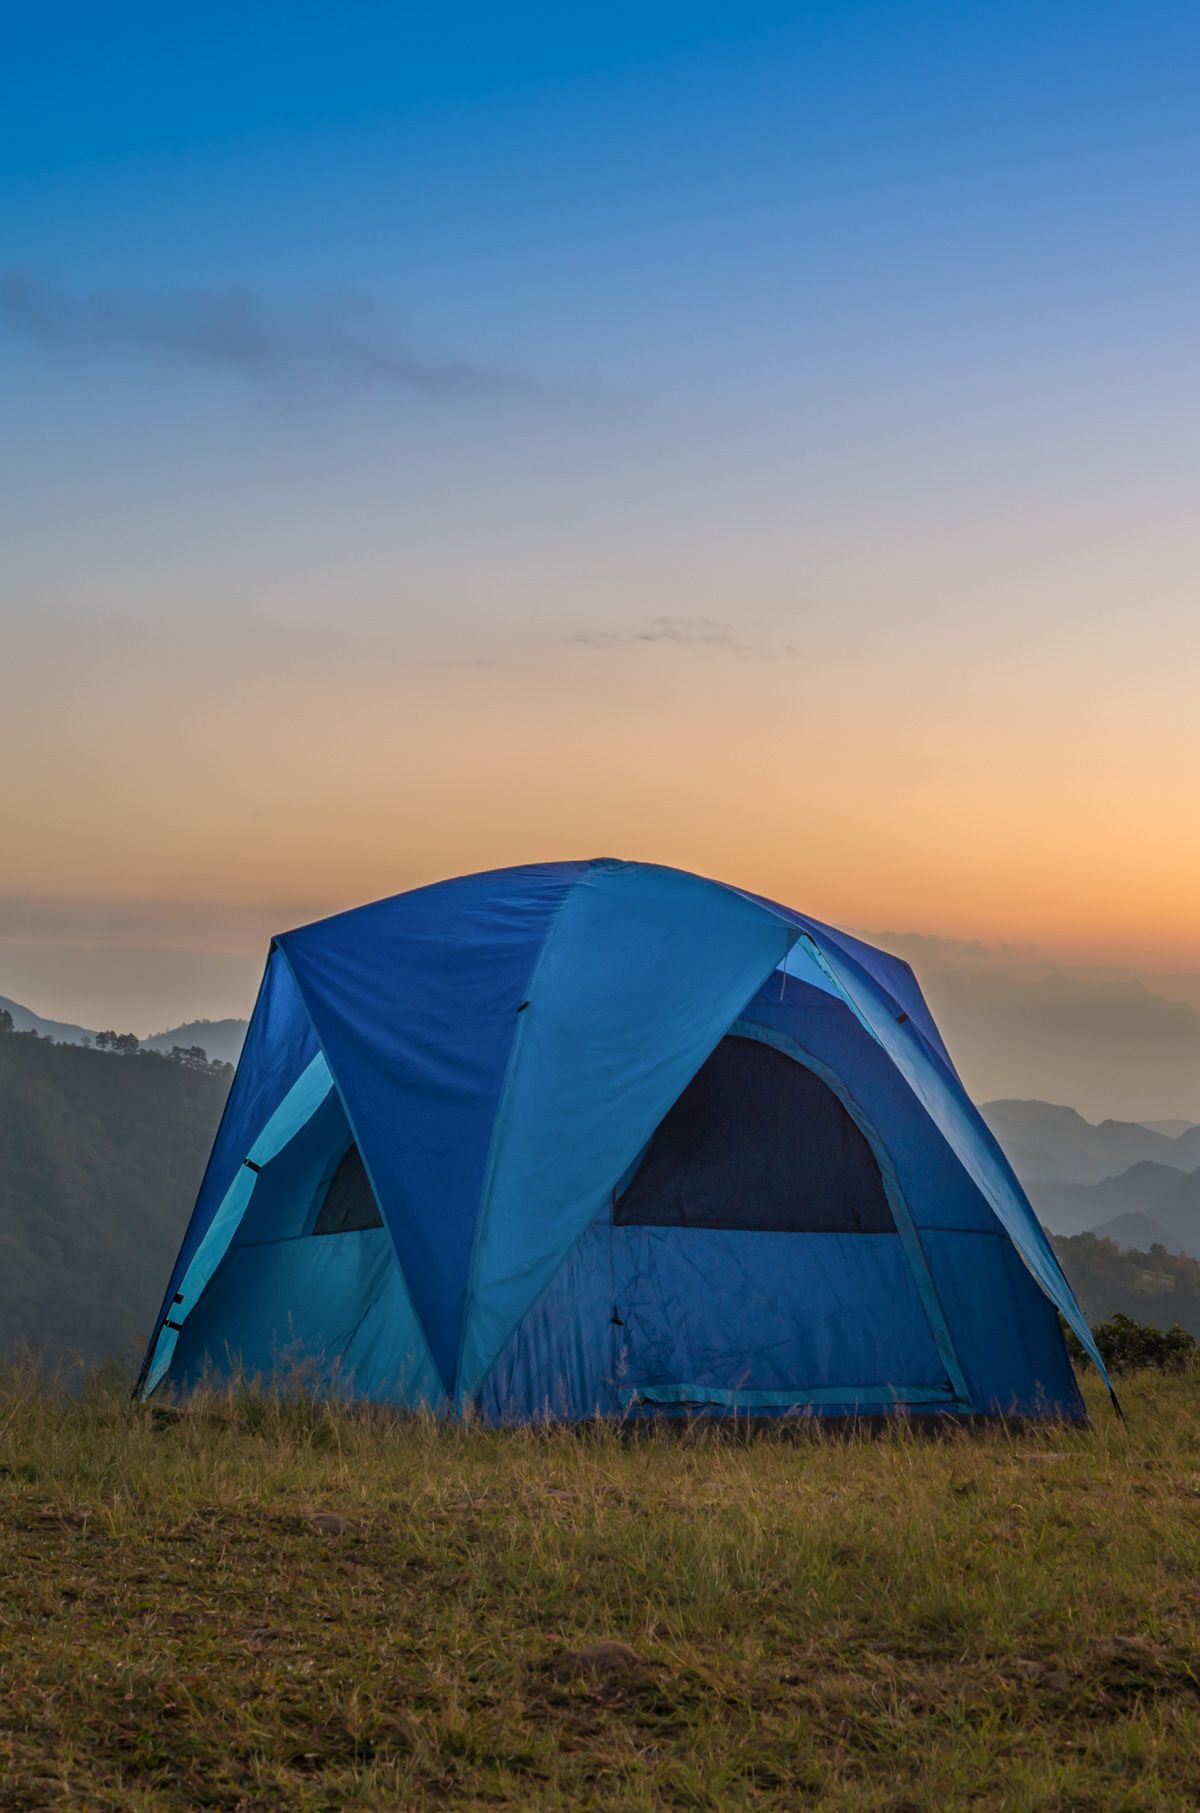 Best Tall Tents
A blue tent standing tall on a grassy hill with a sunset or sunrise silhouetting the mountain ranges in the background.